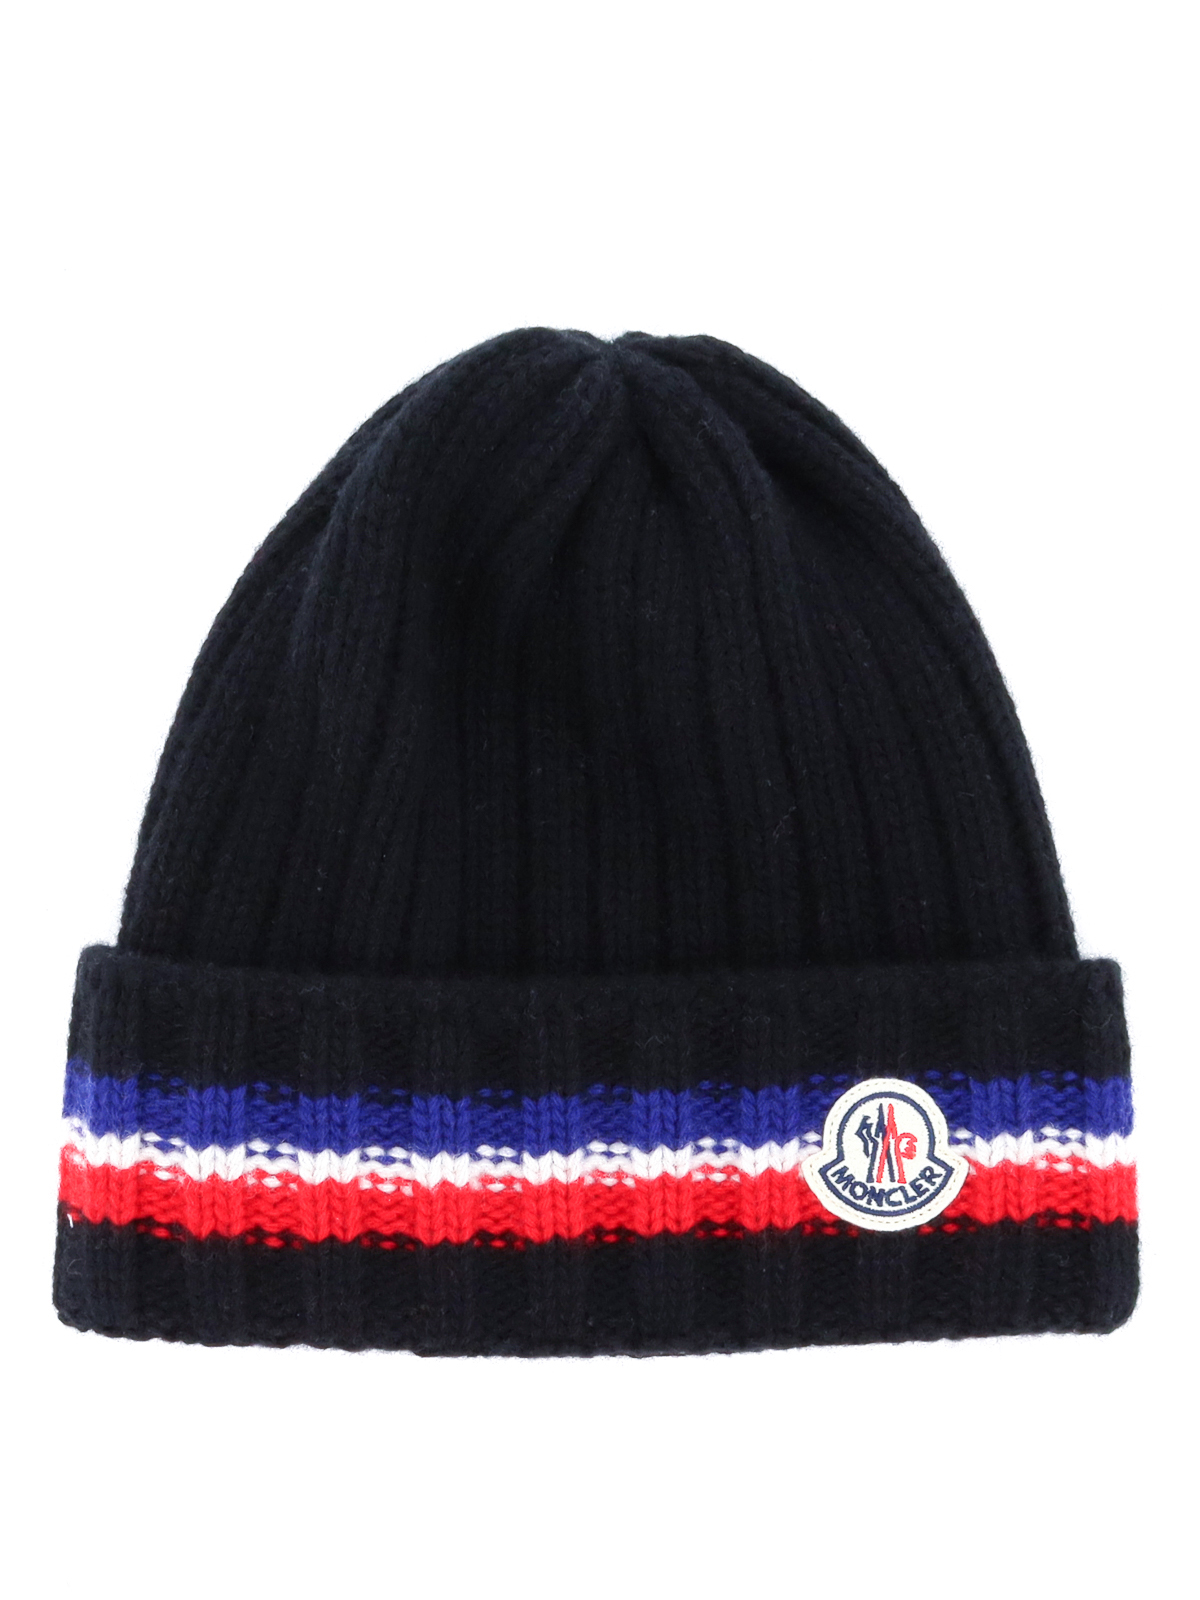 Beanies Moncler - Tricot beanie - 9Z74200A9536999 | Shop online at THEBS